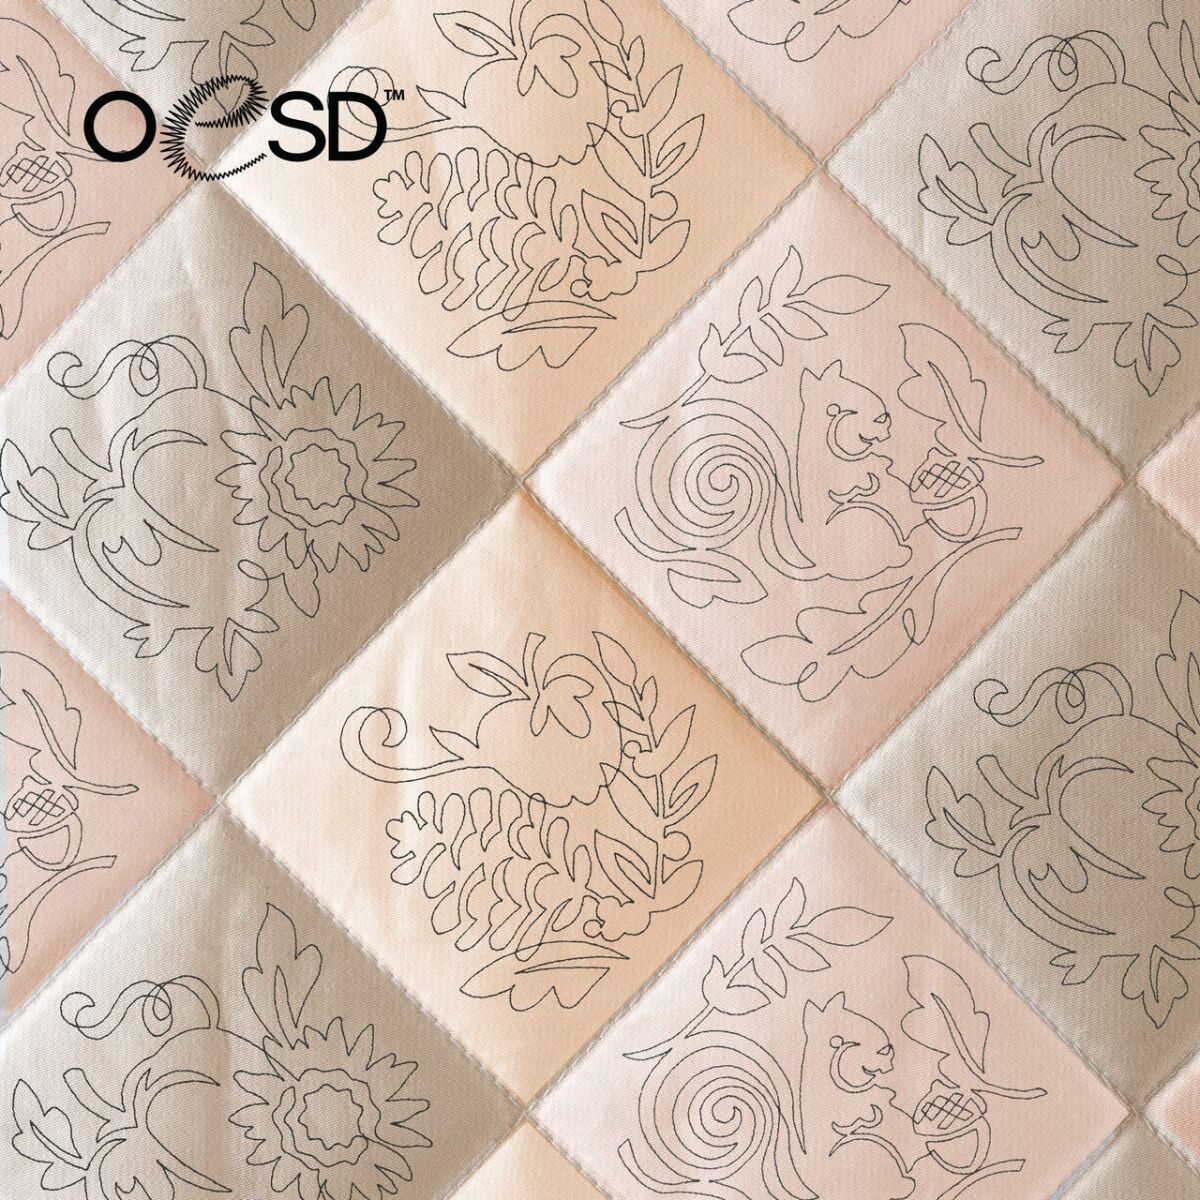 OESD Harvest Quilting Design Collection
,OESD Harvest Quilting Design Collection
,OESD Harvest Quilting Design Collection
,OESD Harvest Quilting Design Collection
